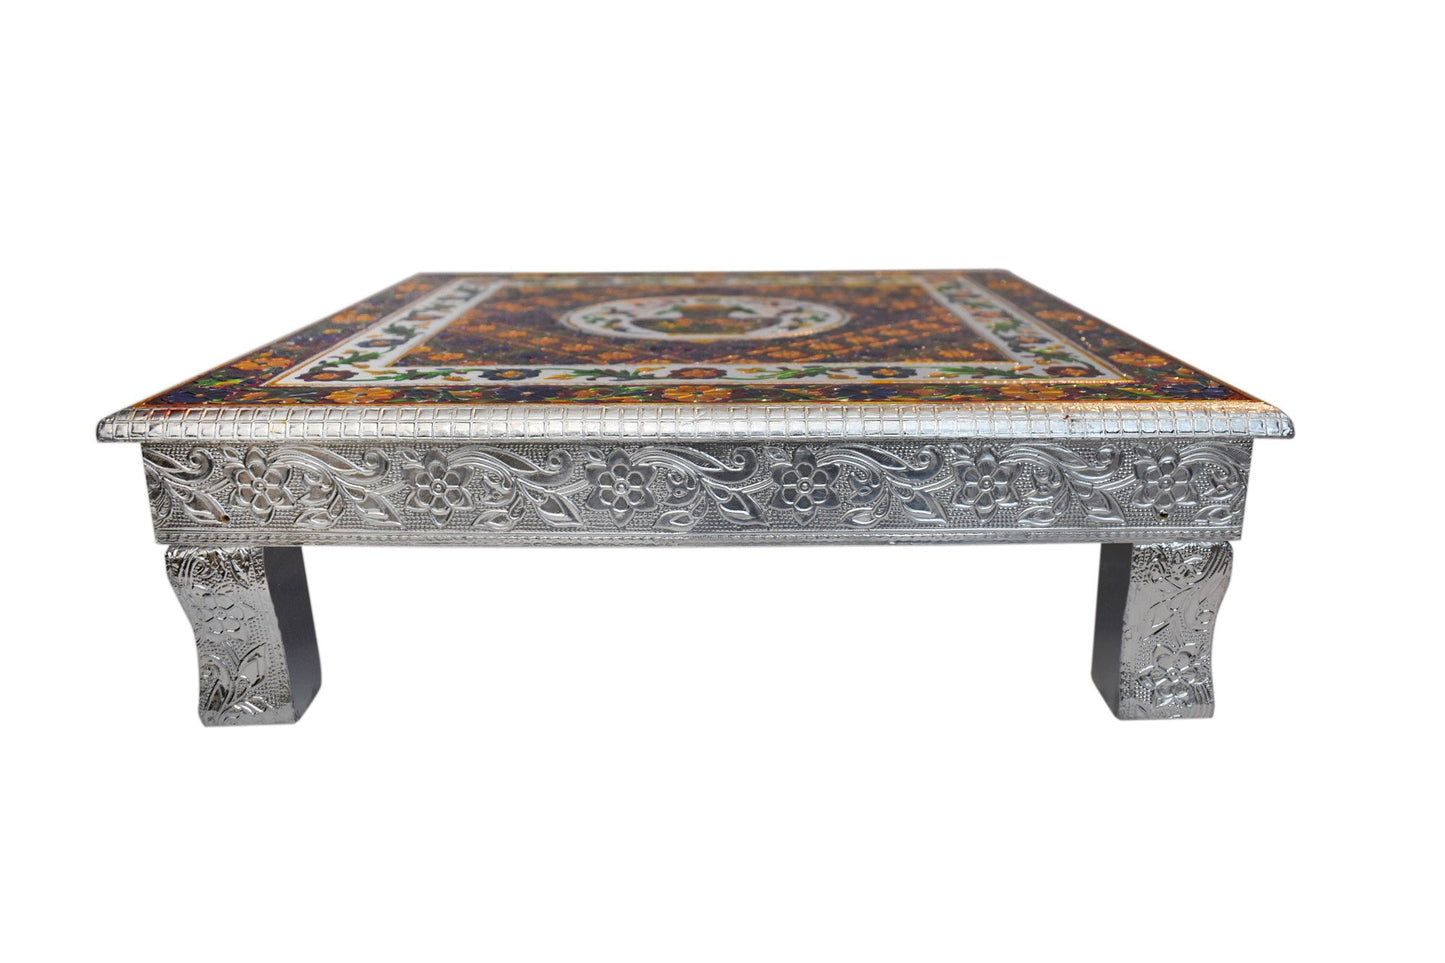 Subh Labh Kalash Bajot by Pooja Bazar Indian Wooden Chowki Puja Table Large - 18 Inch